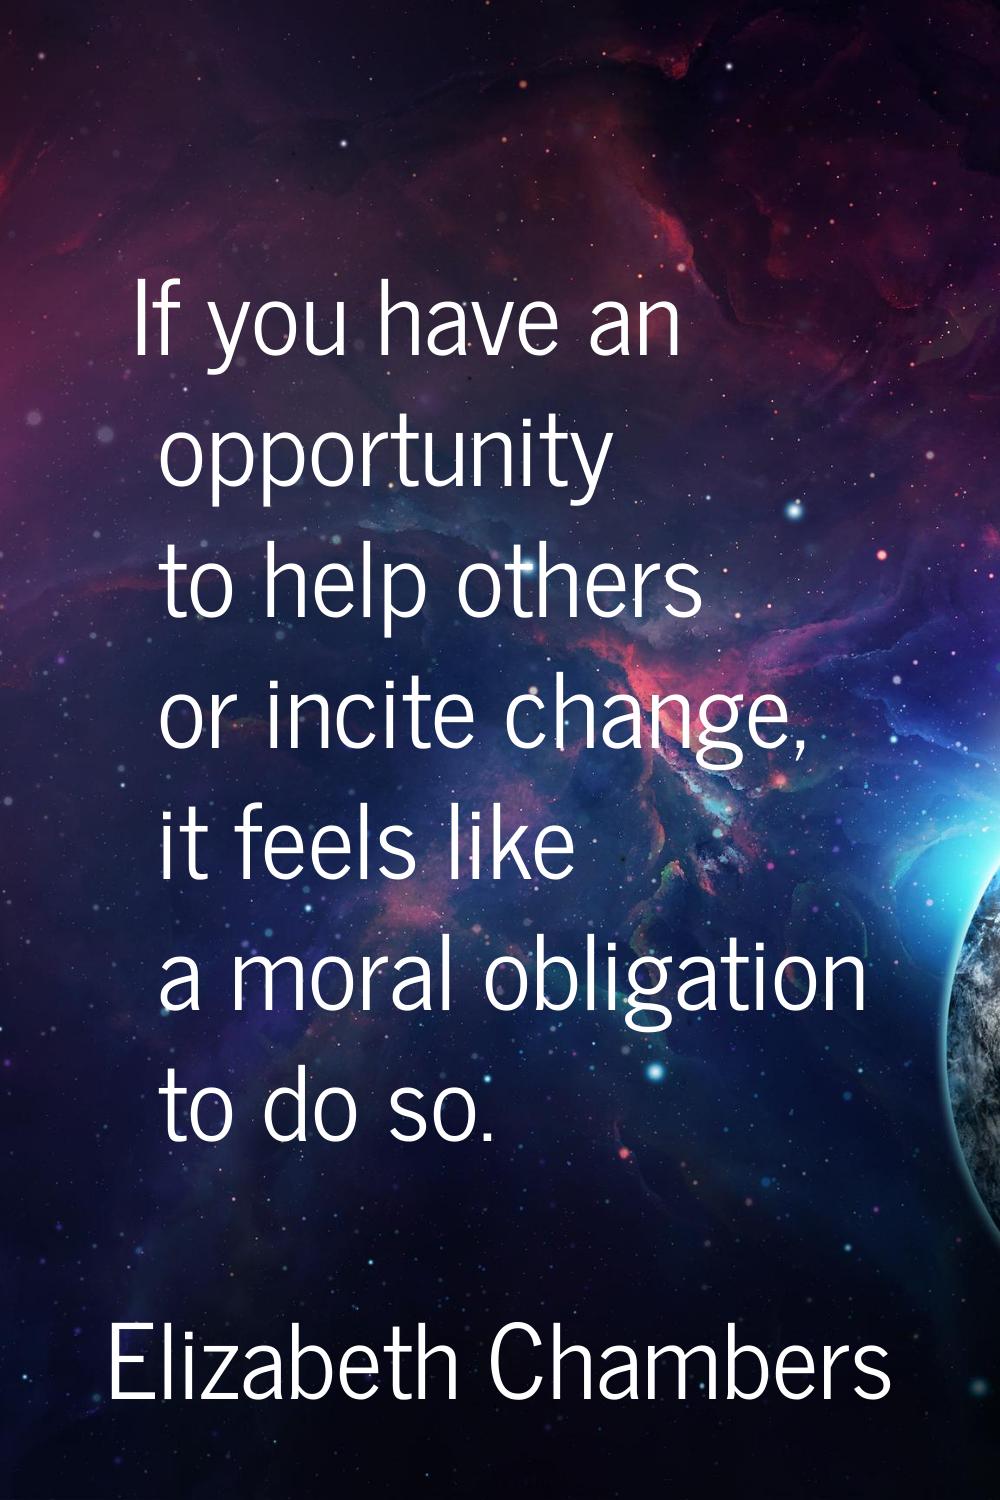 If you have an opportunity to help others or incite change, it feels like a moral obligation to do 